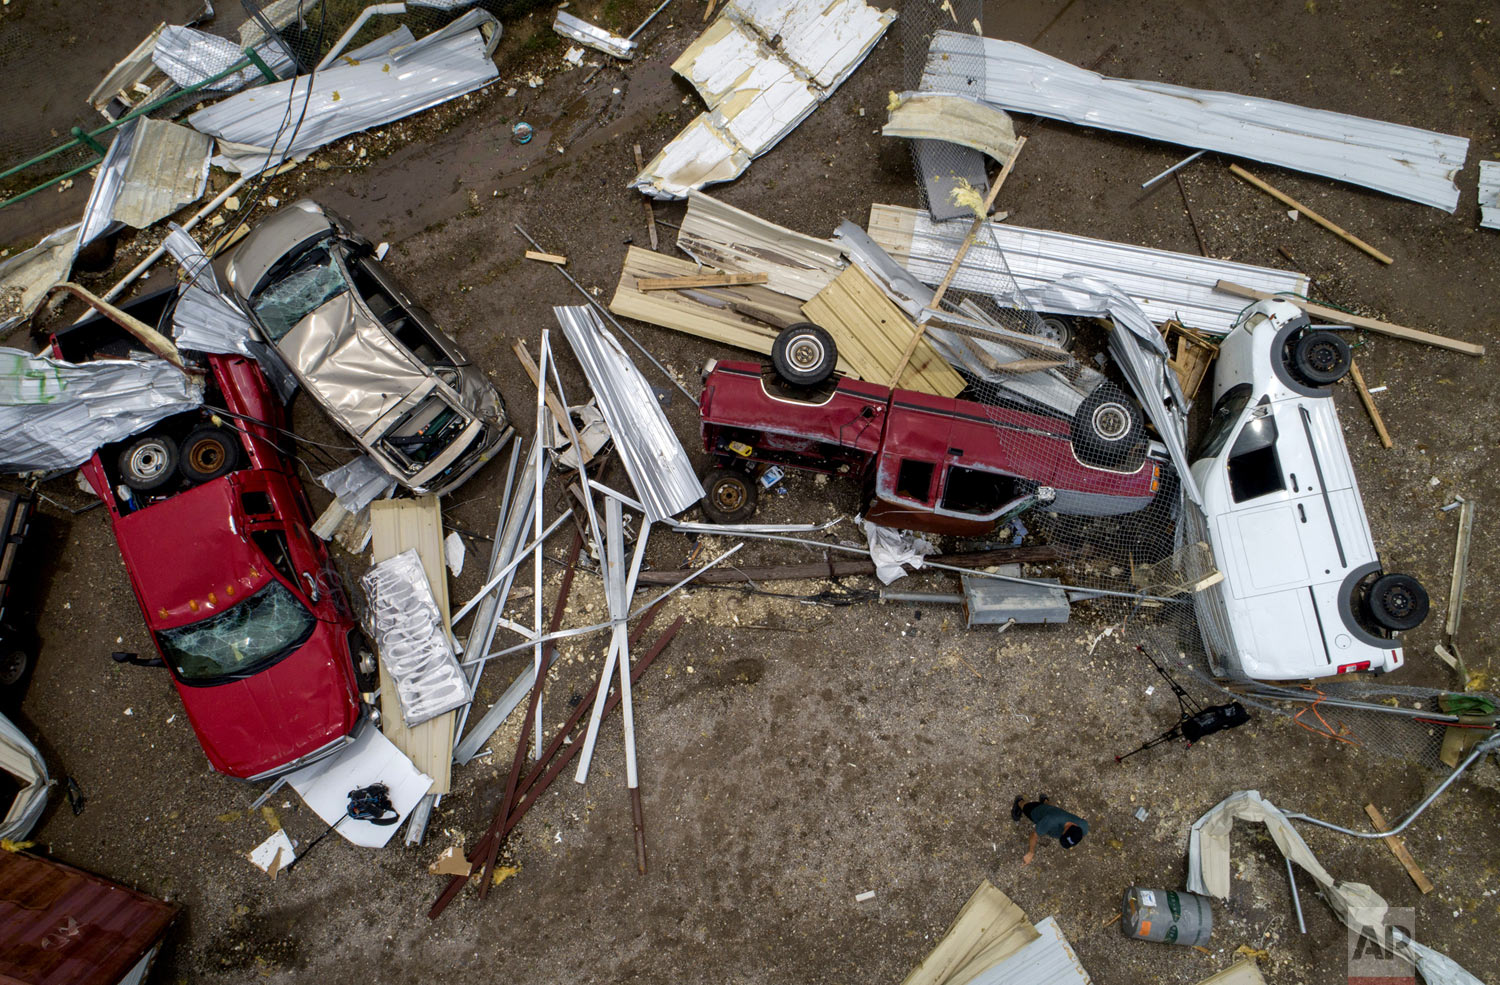  Vehicles are strewn on the property of McCourt & Sons Equipment Inc. after a tornado tore through the area in La Grange, Texas, on Friday May 3, 2019. (Jay Janner/Austin American-Statesman via AP) 